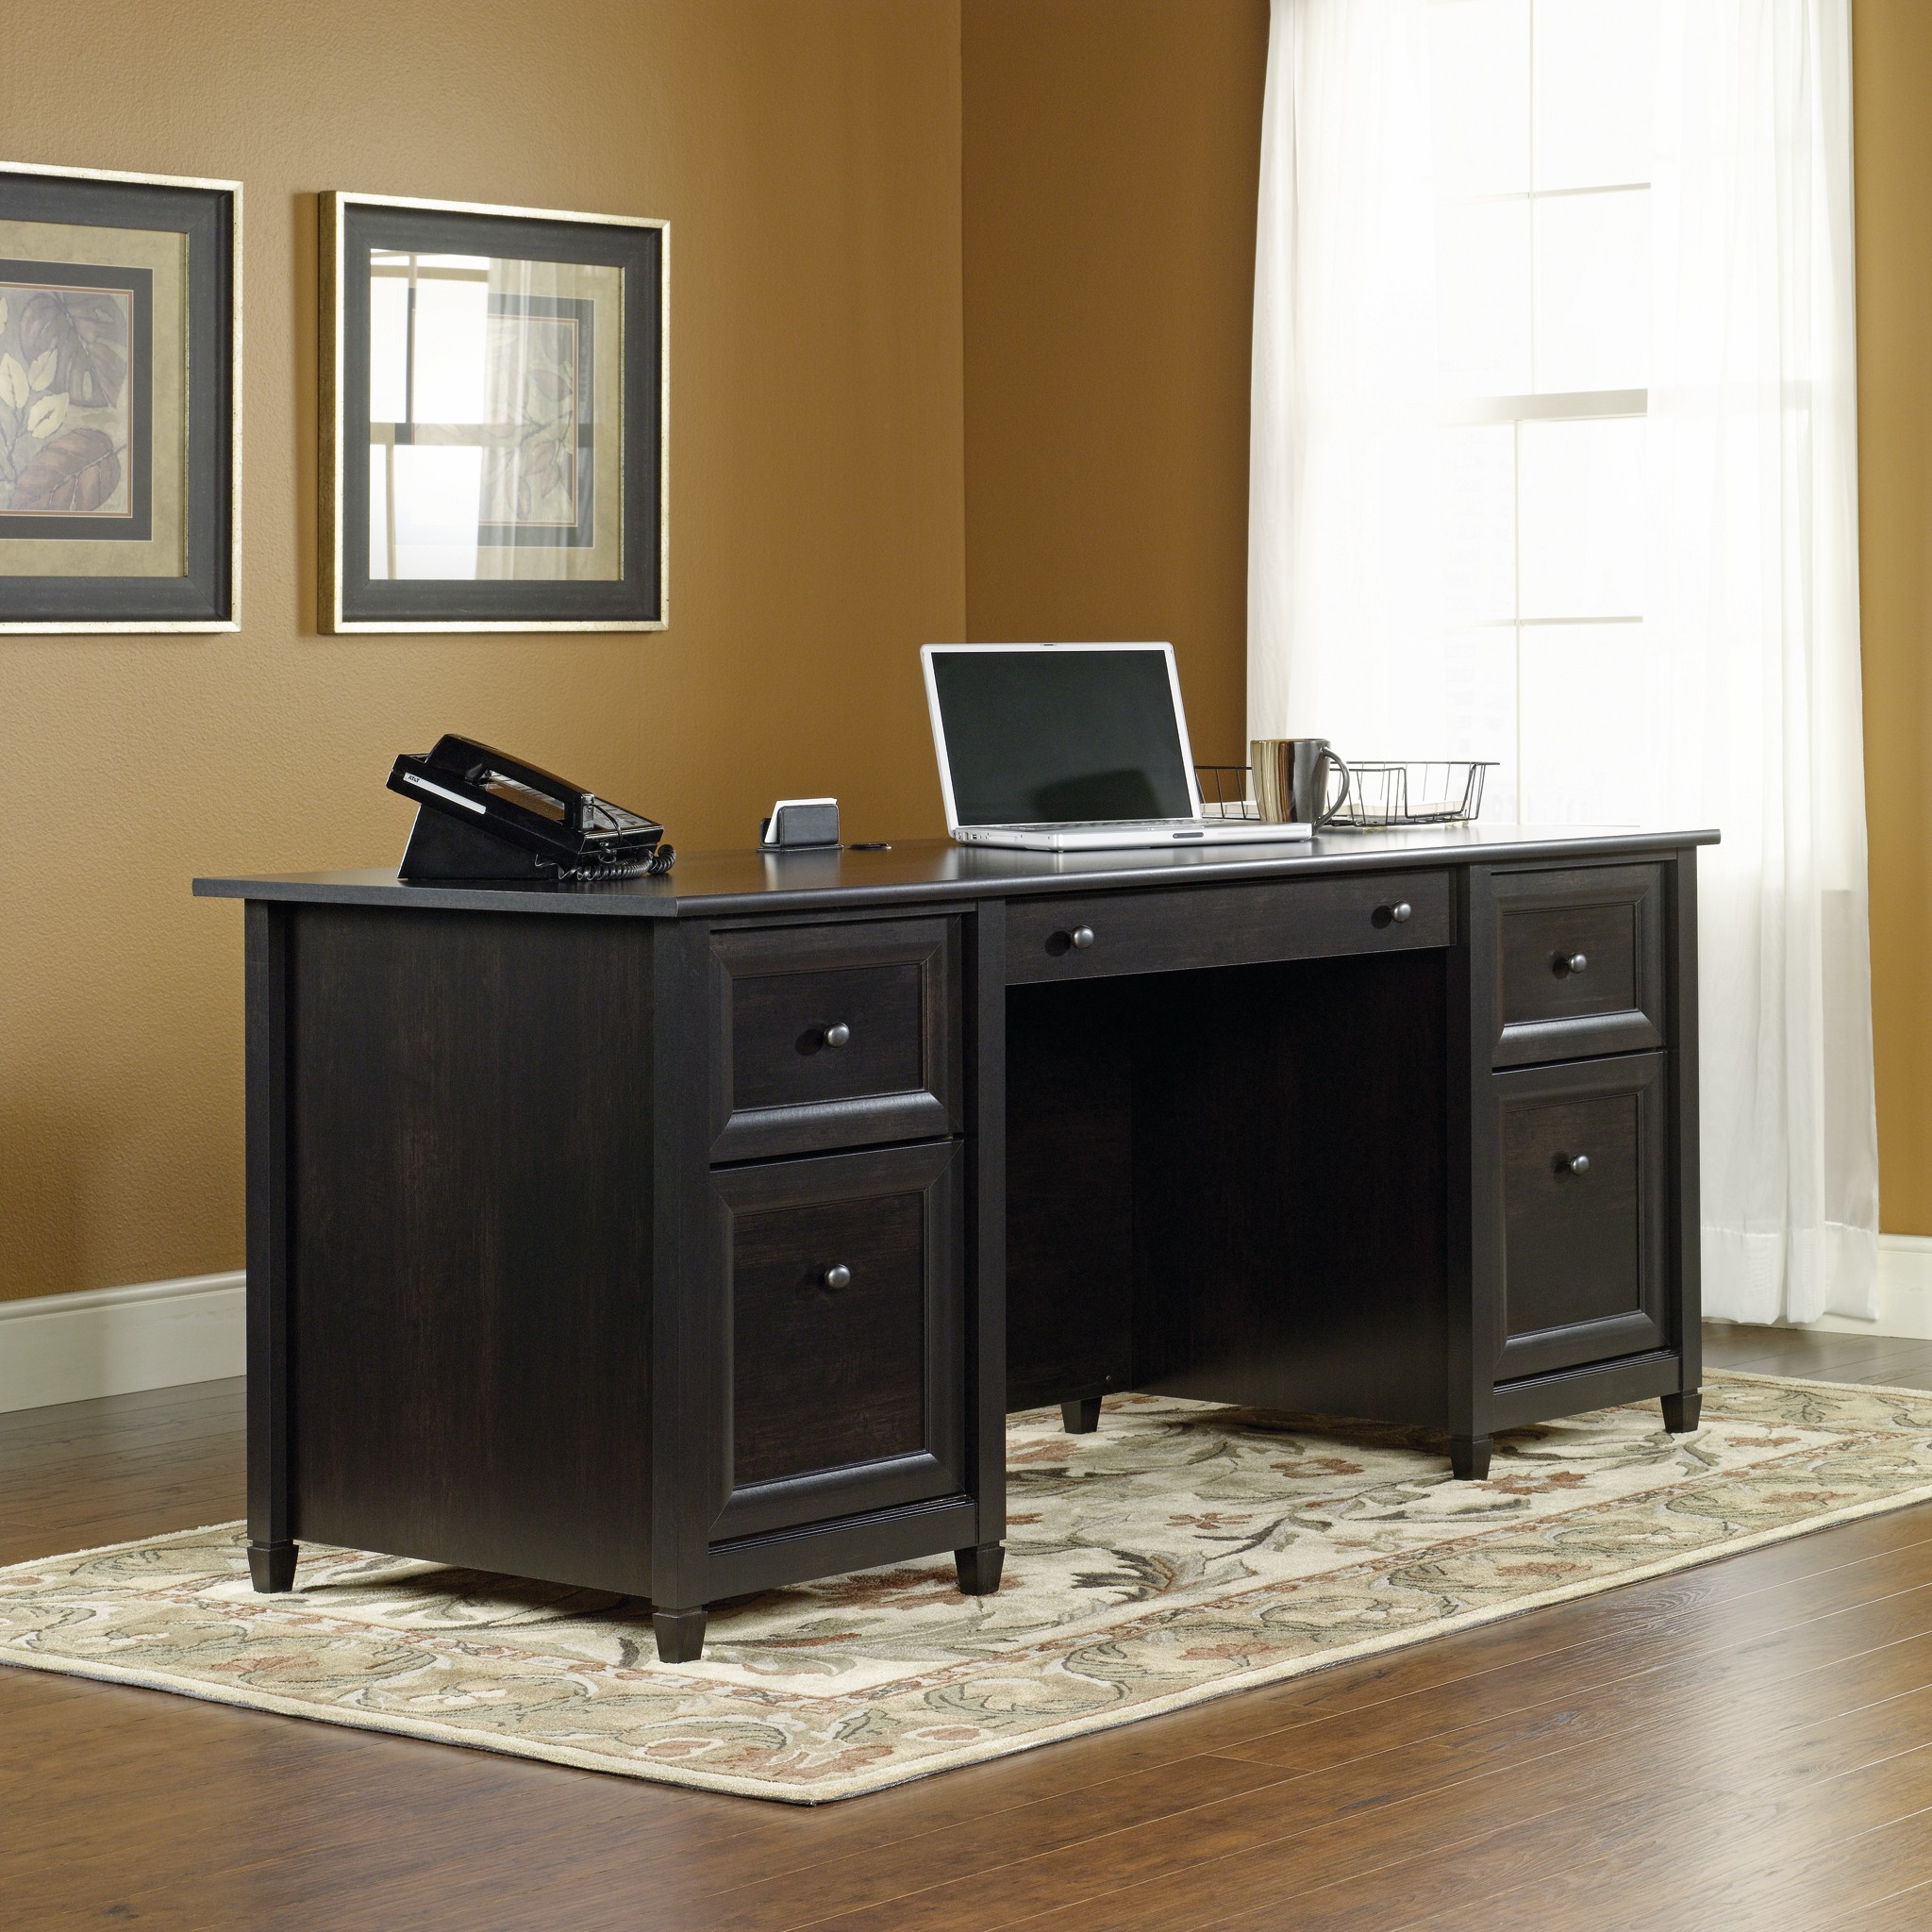 Computer desk with file drawer